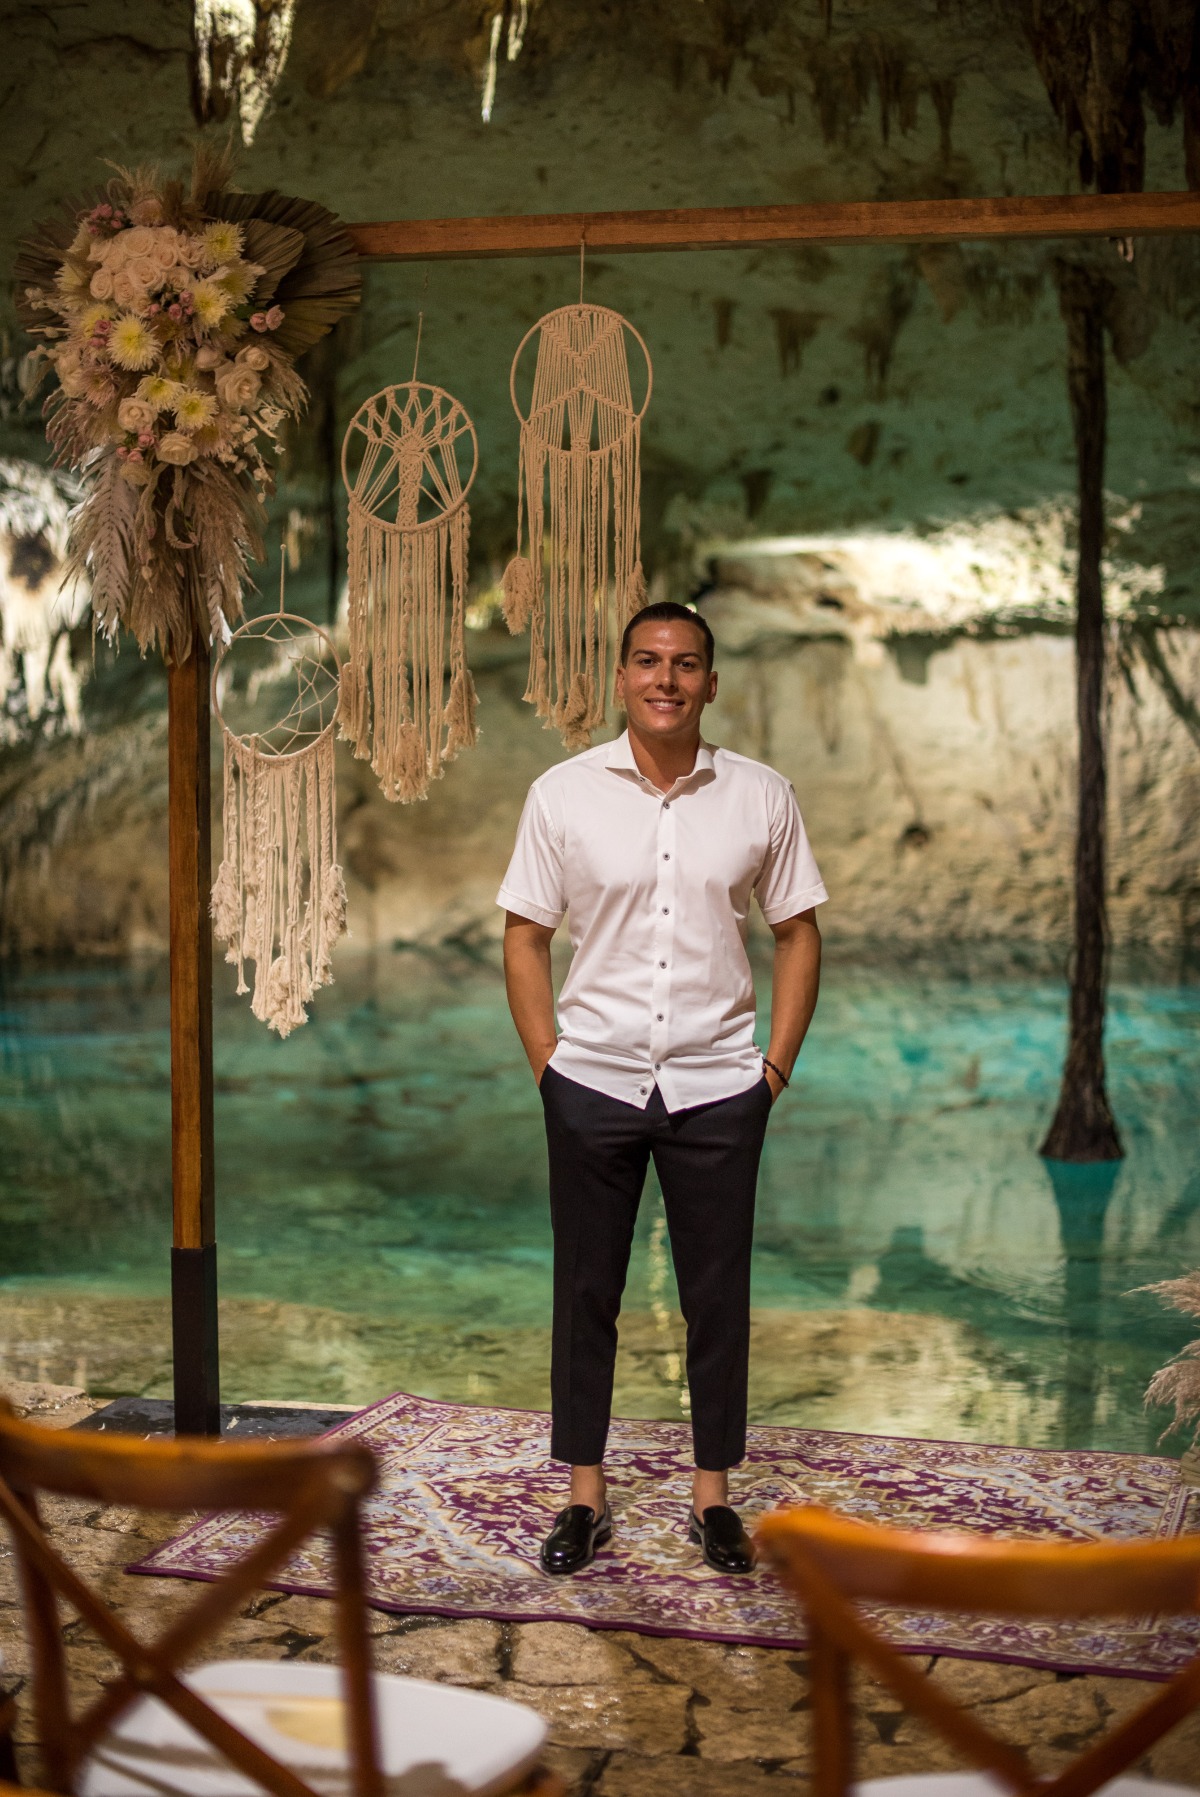 Wedding Ceremony Held in a Magical Cenote